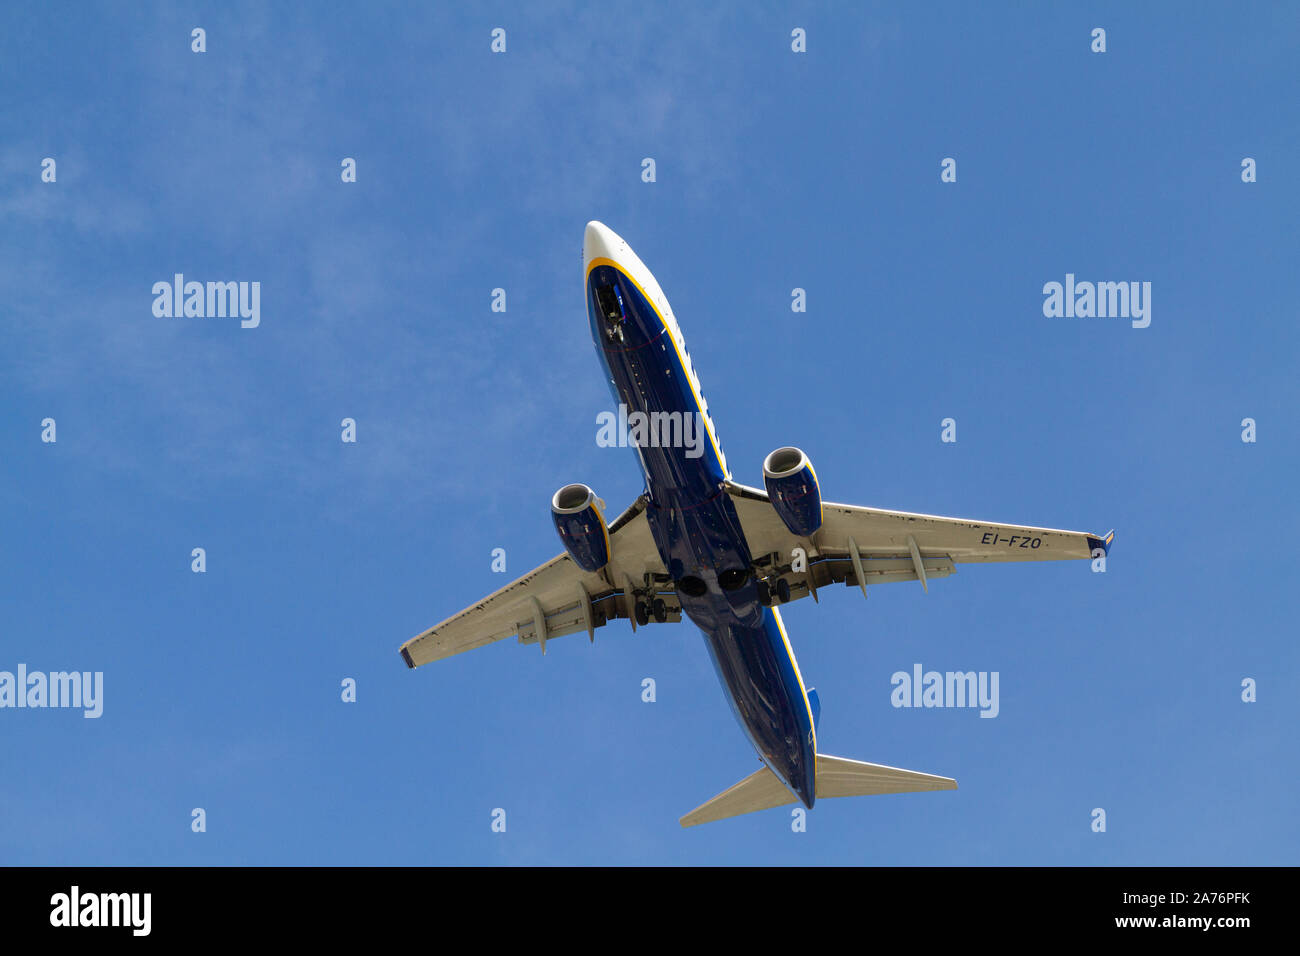 A Ryanair Boeing 737-800 aircraft in the sky just before landing. Stock Photo